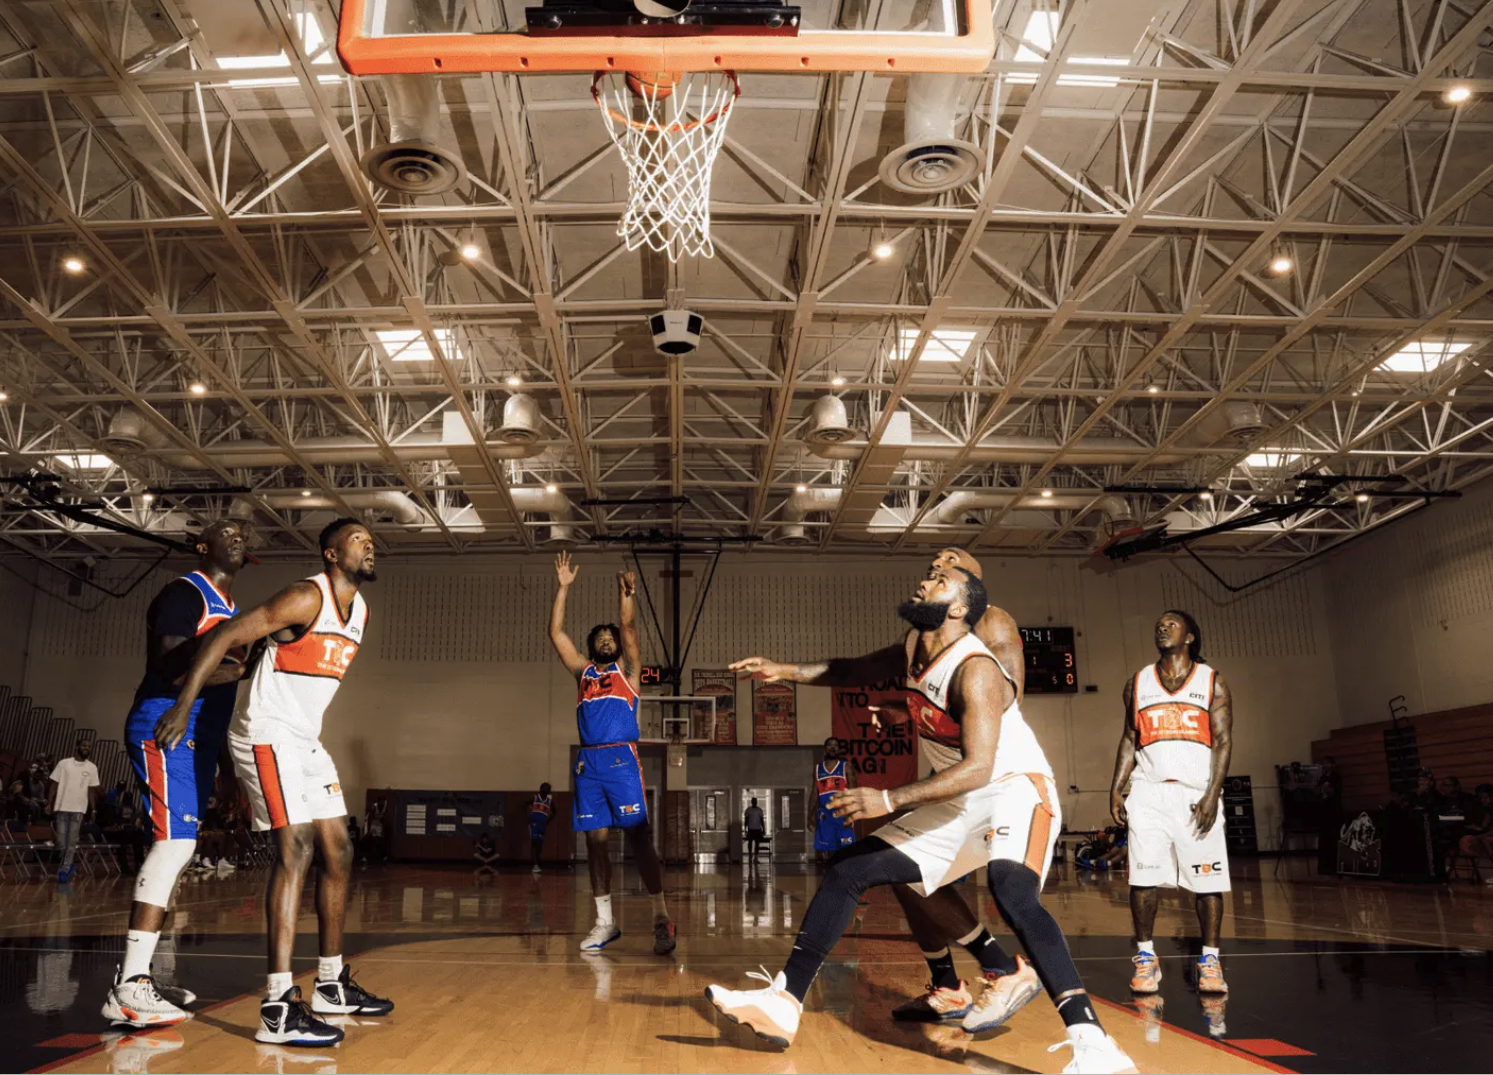 The Bitcoin Classic held its latest Basketball tournament in Atlanta